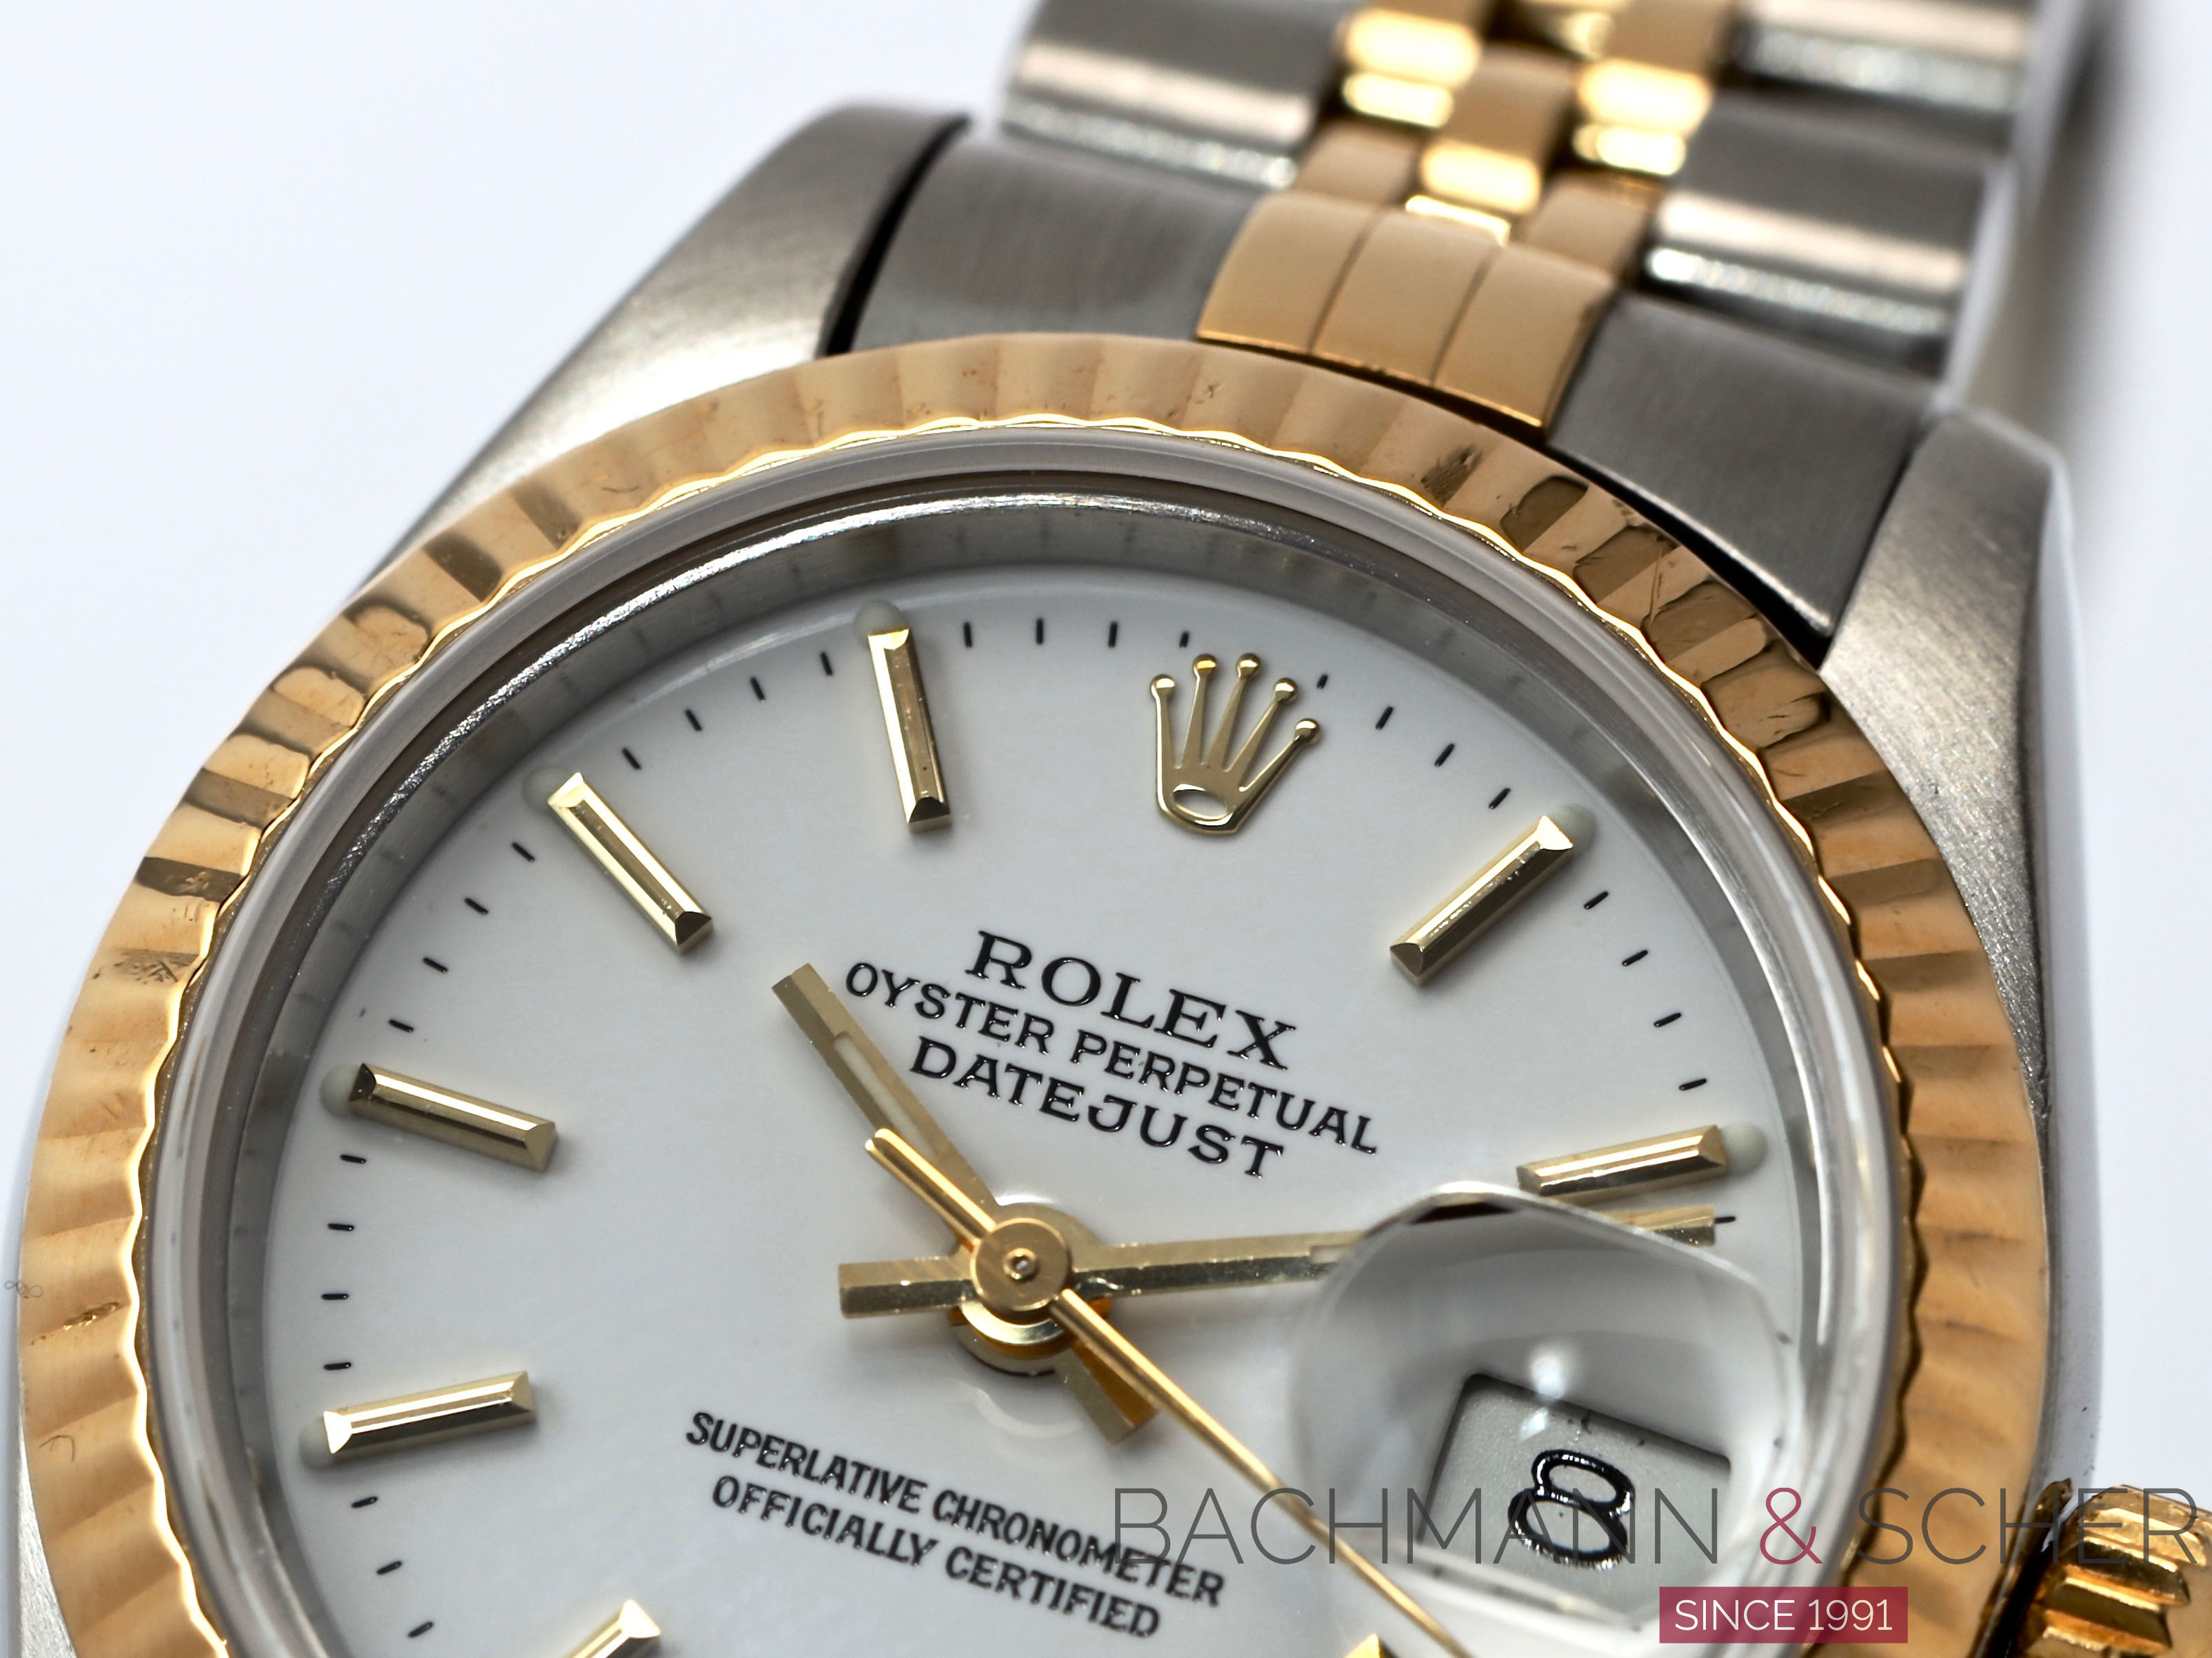 Rolex Datejust Lady 18k Yellow Gold/ Stainless Steel Bj-1992